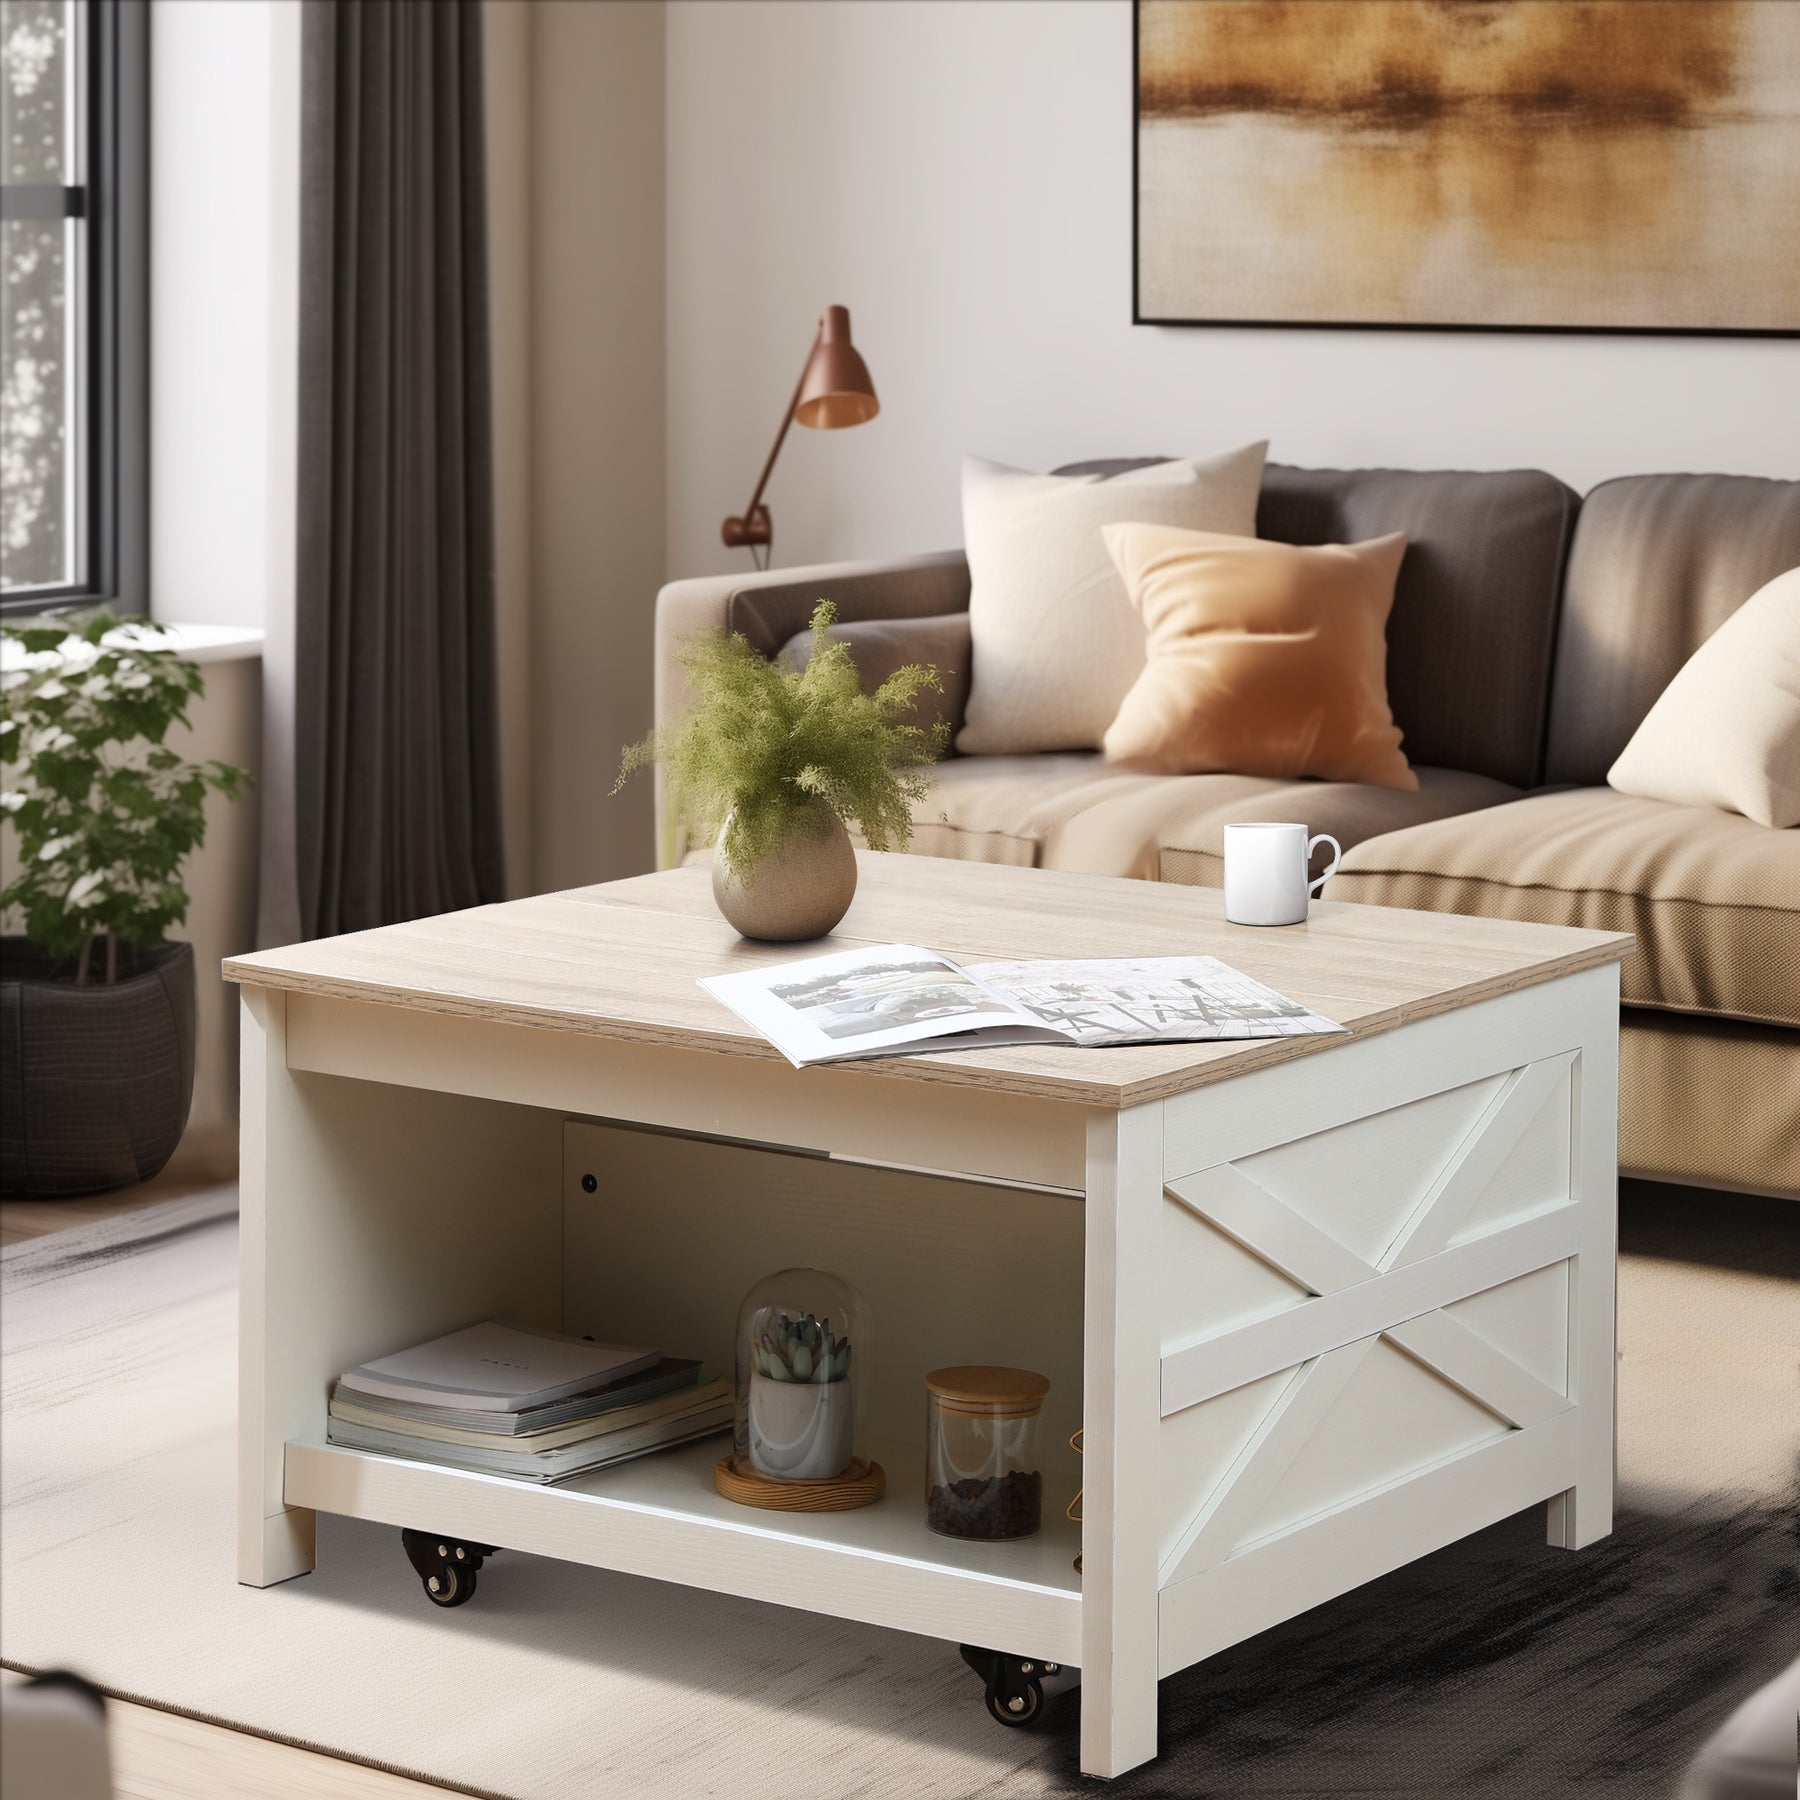 Evajoy Lift Top Coffee Table, Farmhouse Square Center Table with Storage, Dining Table with Hidden Compartment